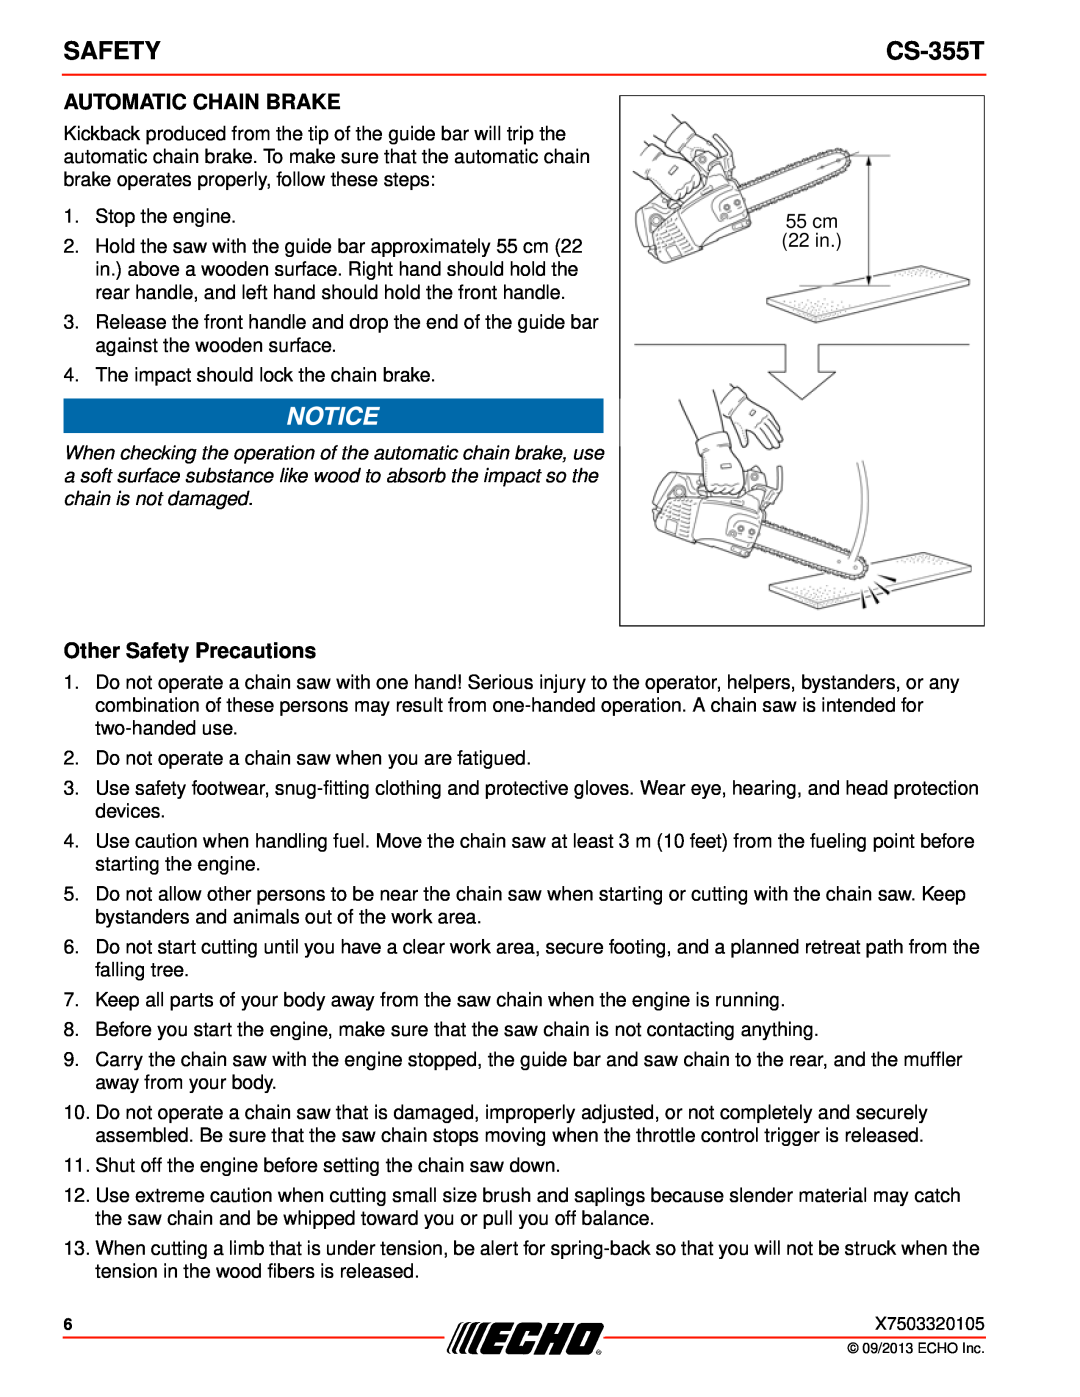 Echo CS-355T instruction manual Automatic Chain Brake, Other Safety Precautions 